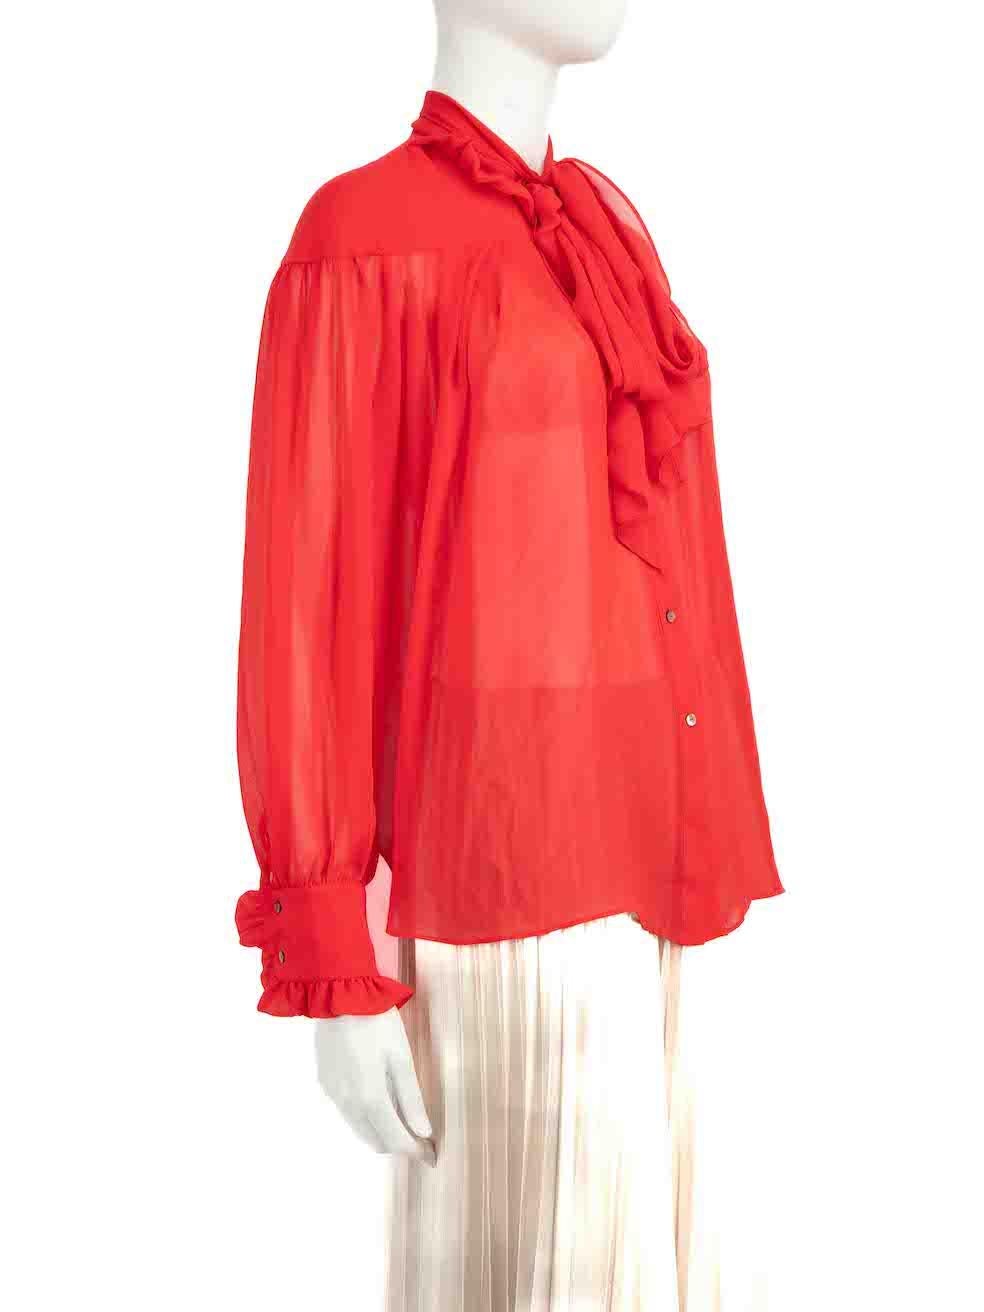 CONDITION is Very good. Minimal wear to shirt is evident. Minimal discolouration to edge of neck tie on this used Rejina Pyo designer resale item.
 
 
 
 Details
 
 
 Red
 
 Polyester
 
 Blouse
 
 Sheer
 
 Long sleeves
 
 Button up fastening
 
